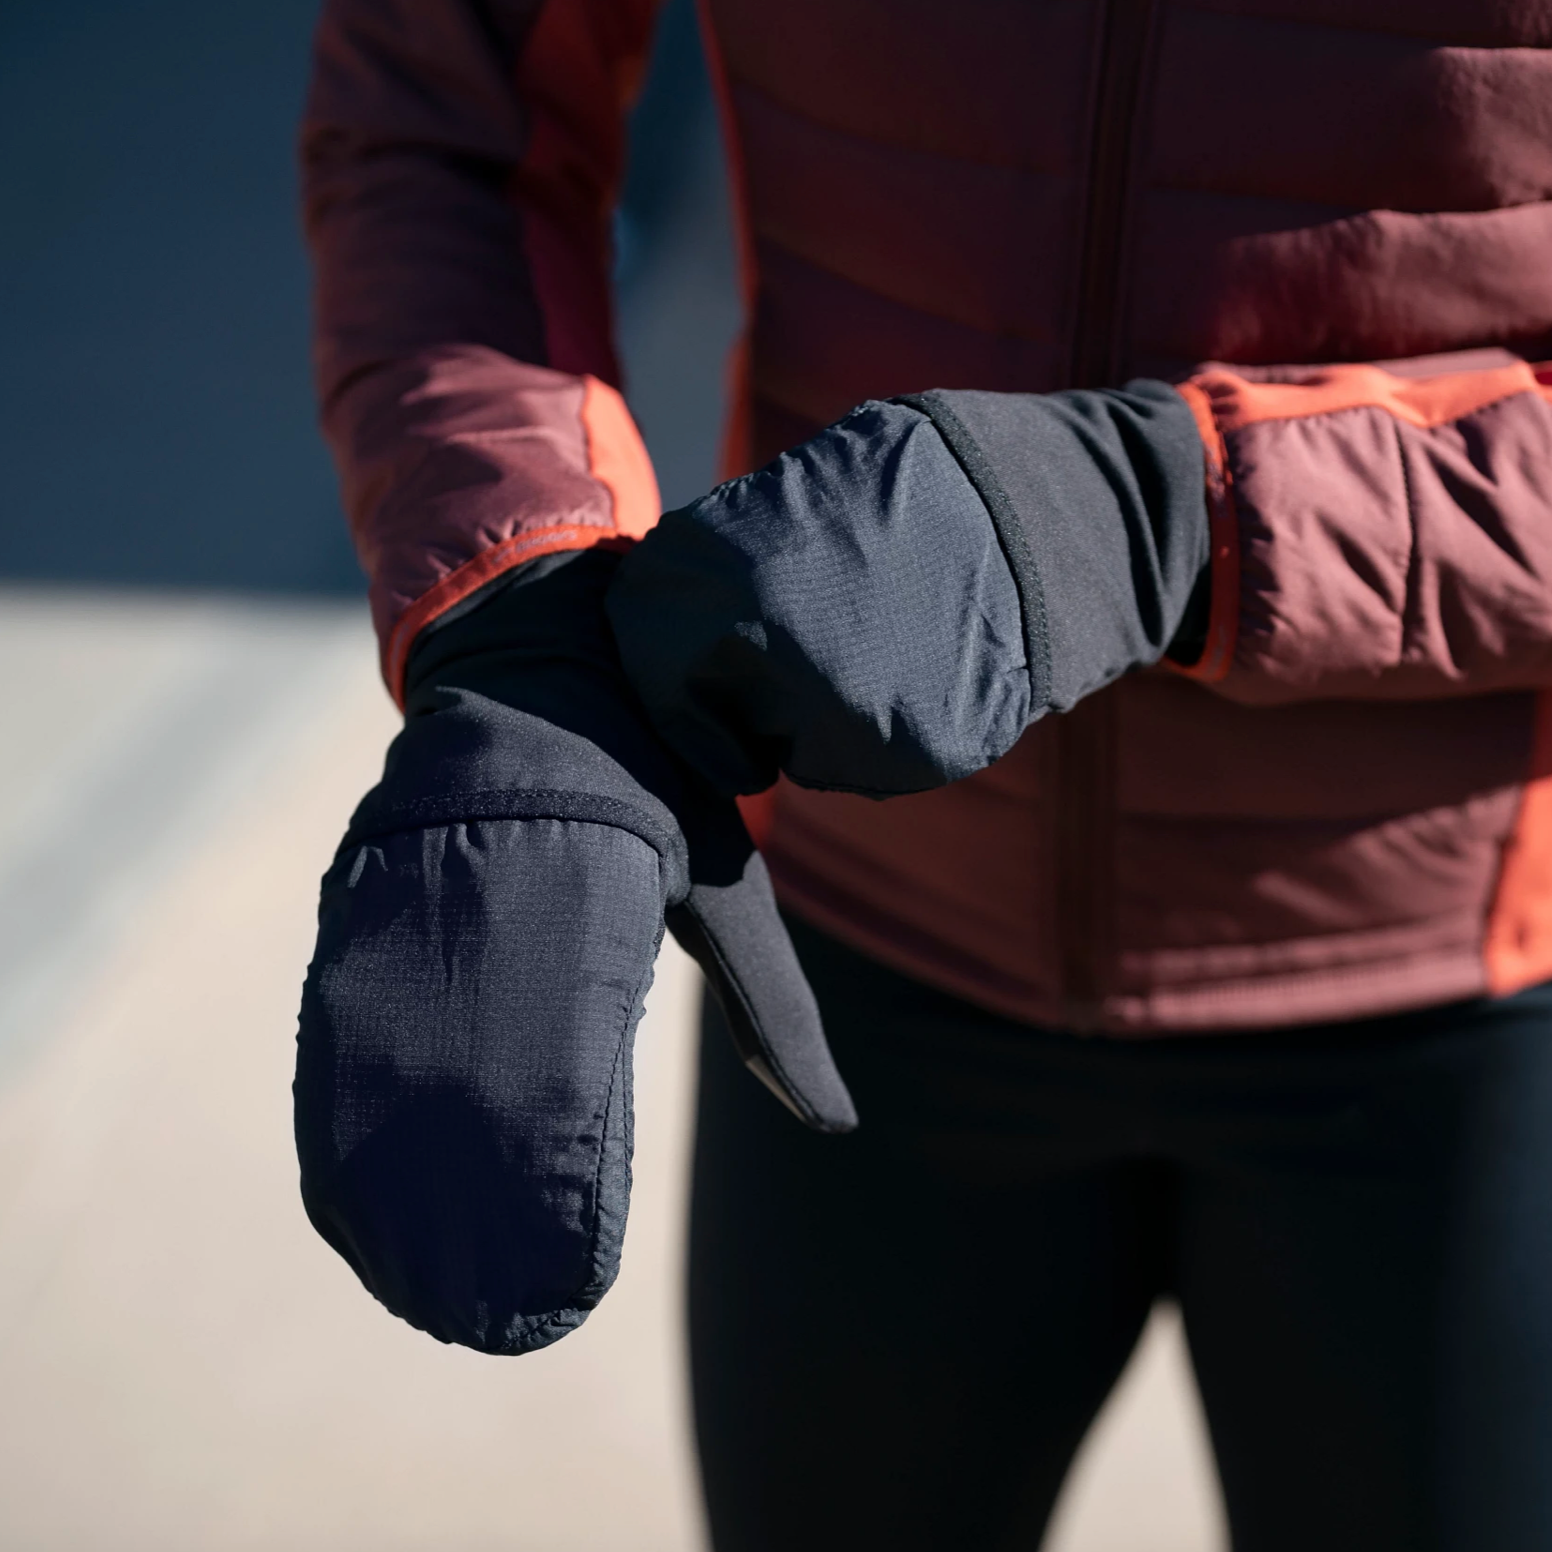 picture of someone putting on gloves. click to shop winter glove and headwear.